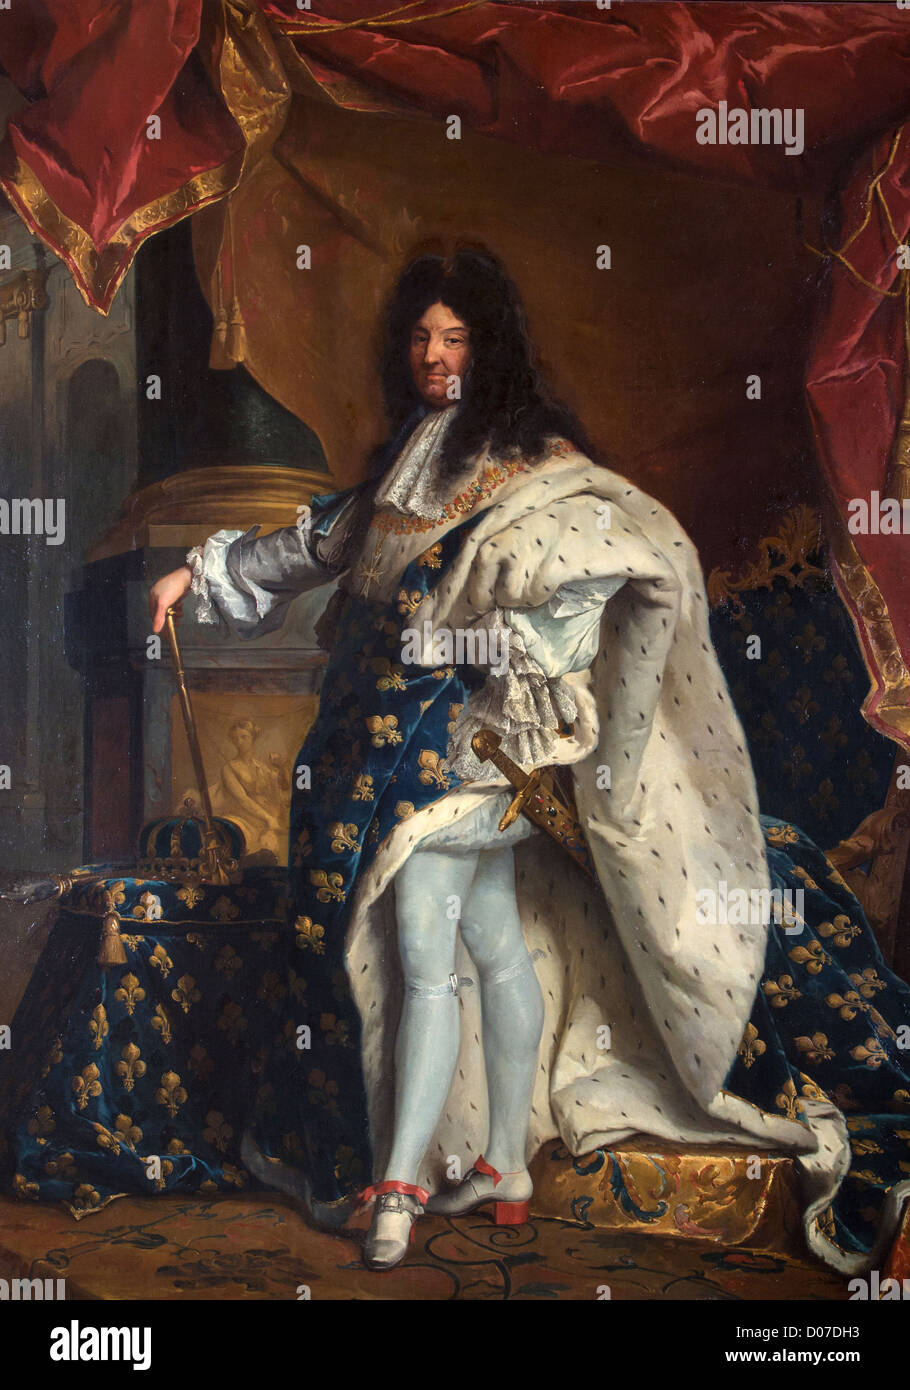 Portrait of Louis XIV in coronation costume, French school of the 18th cent  - Ref.91243